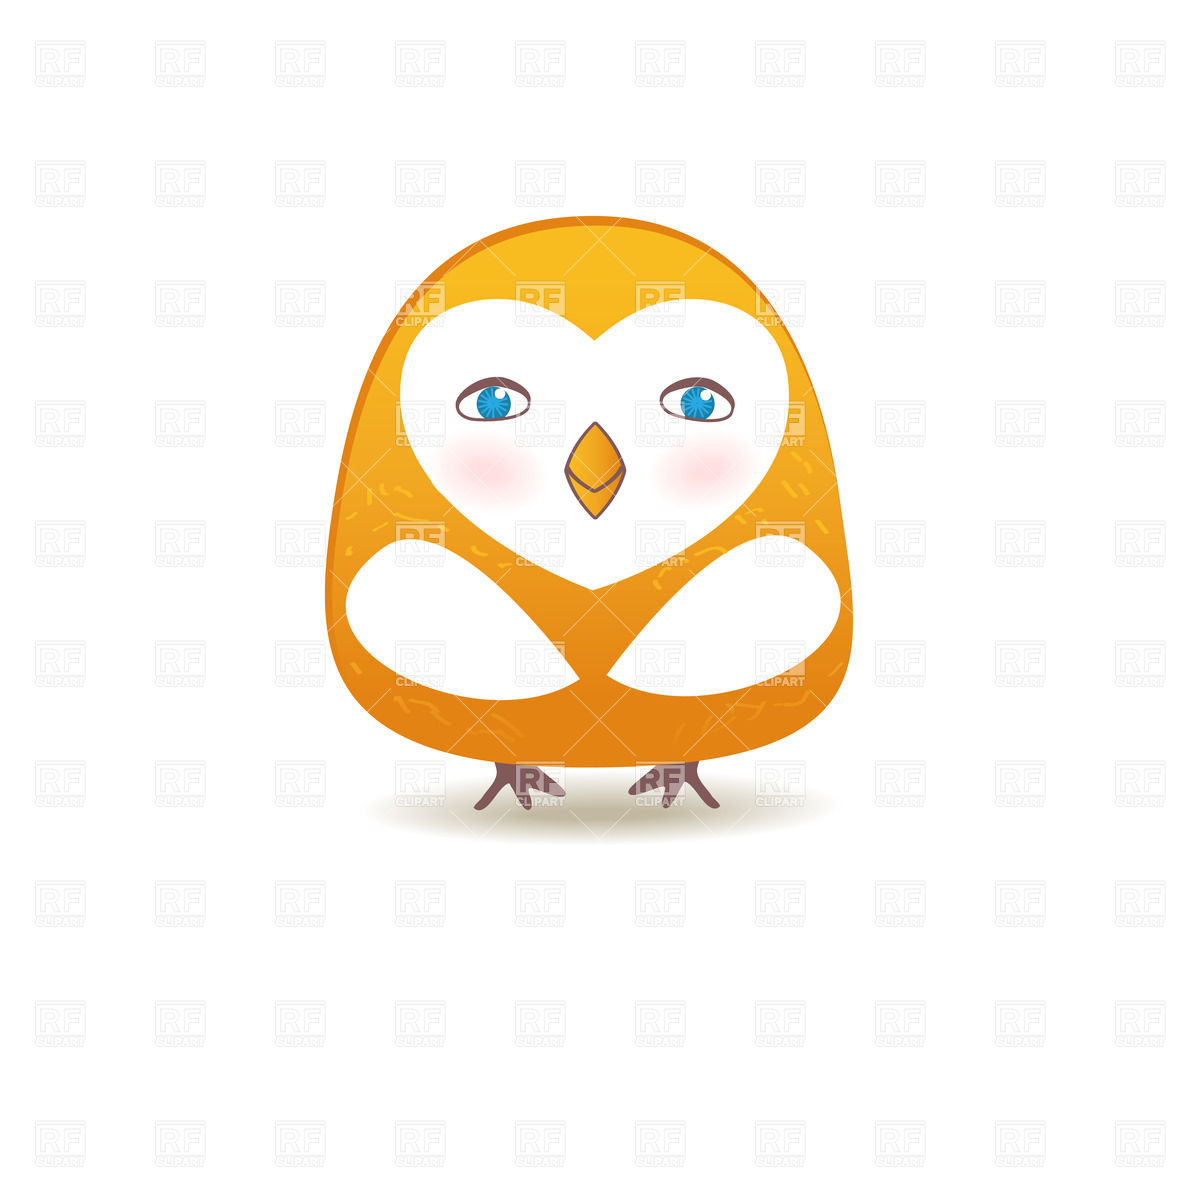 Funny Owl   Cute Bird Character 22657 Download Royalty Free Vector